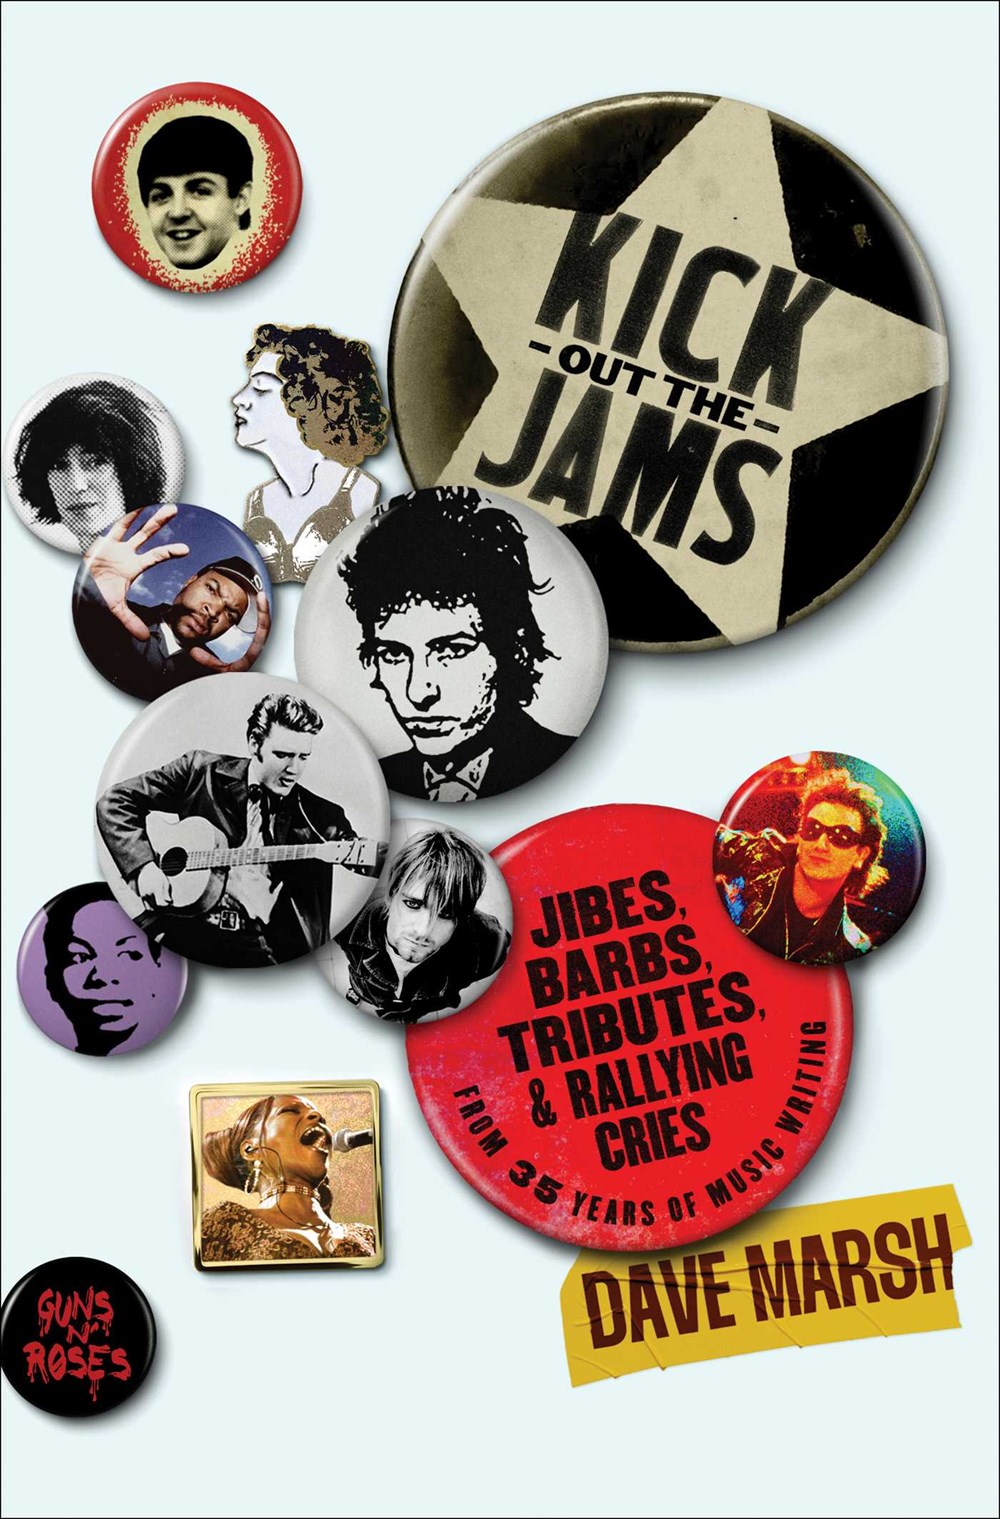 Kick Out the Jams: Jibes, Barbs, Tributes, and Rallying Cries from 35 Years of Music Writing